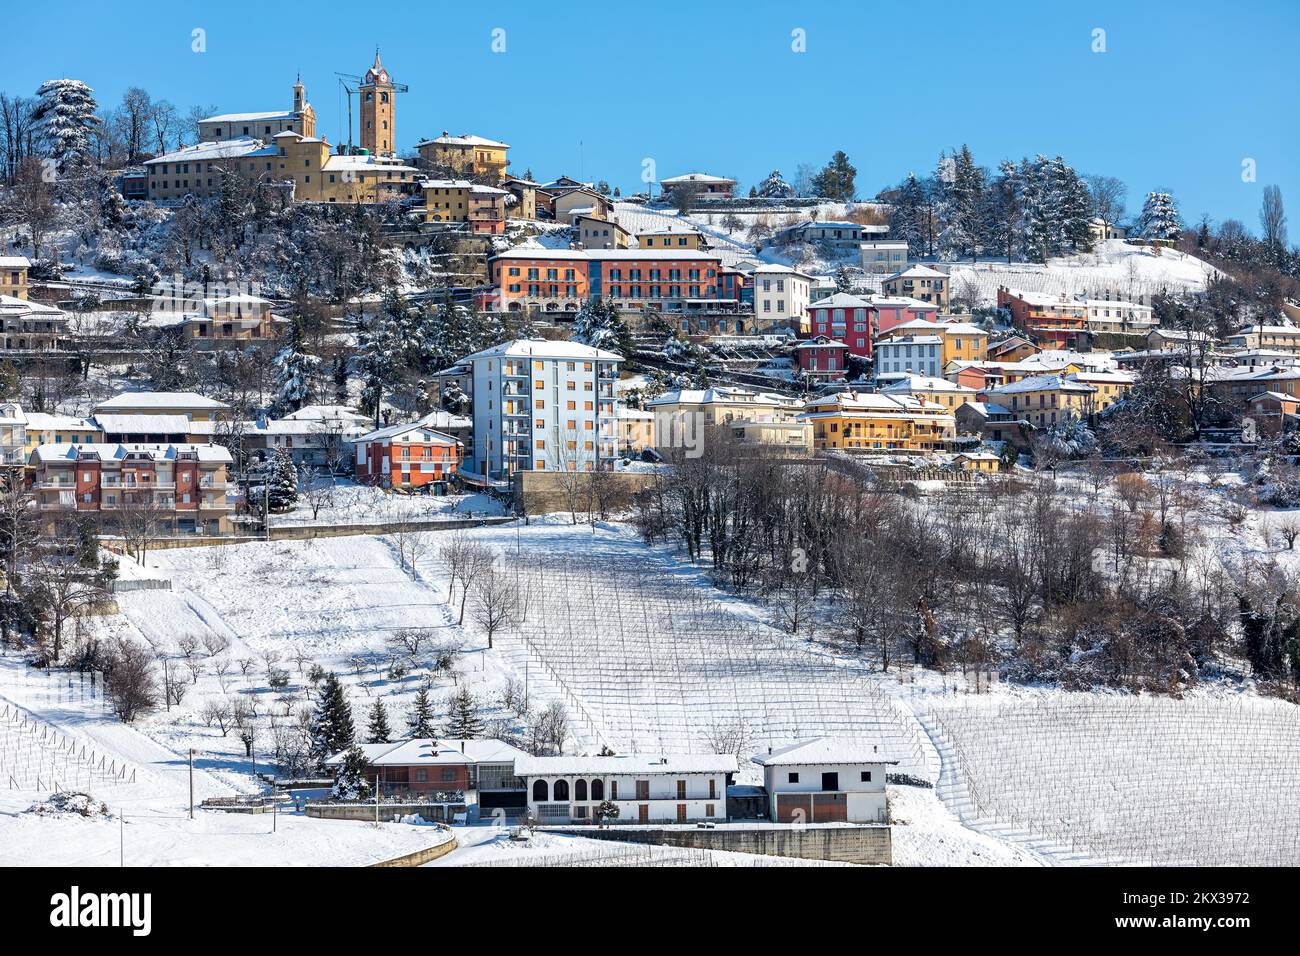 View of small town on snowy hill under blue sky in Piedmont, Northern Italy. Stock Photo